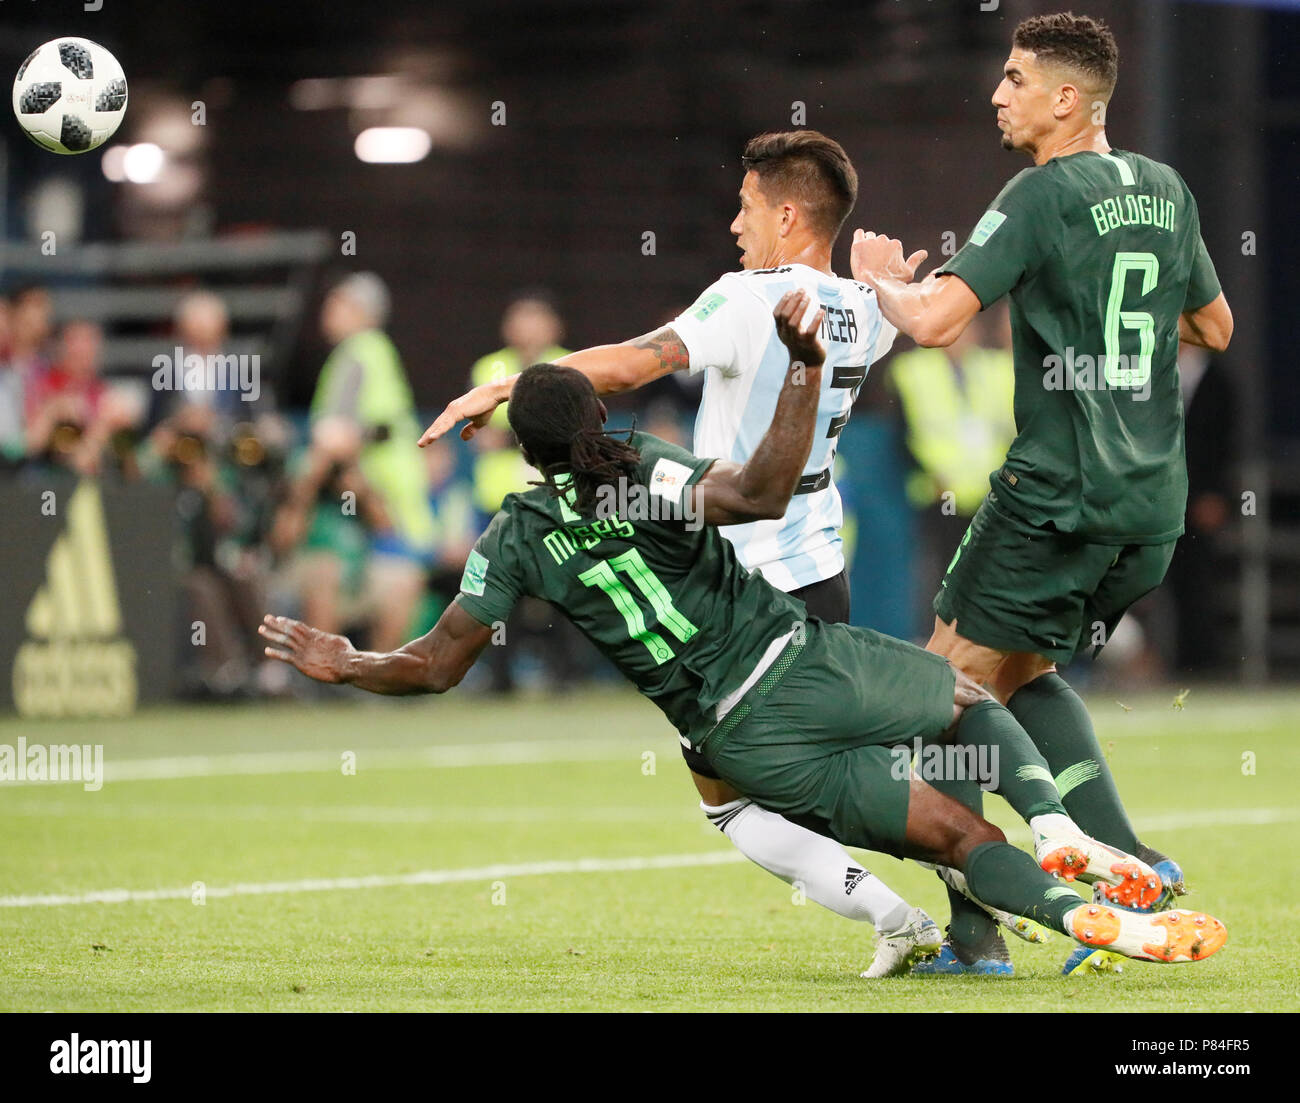 SAINT PETERSBURG, RUSSIA - JUNE 26: Maximiliano Meza (C) of Argentina national team vies for the ball with Victor Moses and Leon Balogun (R) of Nigeria national team during the 2018 FIFA World Cup Russia group D match between Nigeria and Argentina at Saint Petersburg Stadium on June 26, 2018 in Saint Petersburg, Russia. (MB Media) Stock Photo